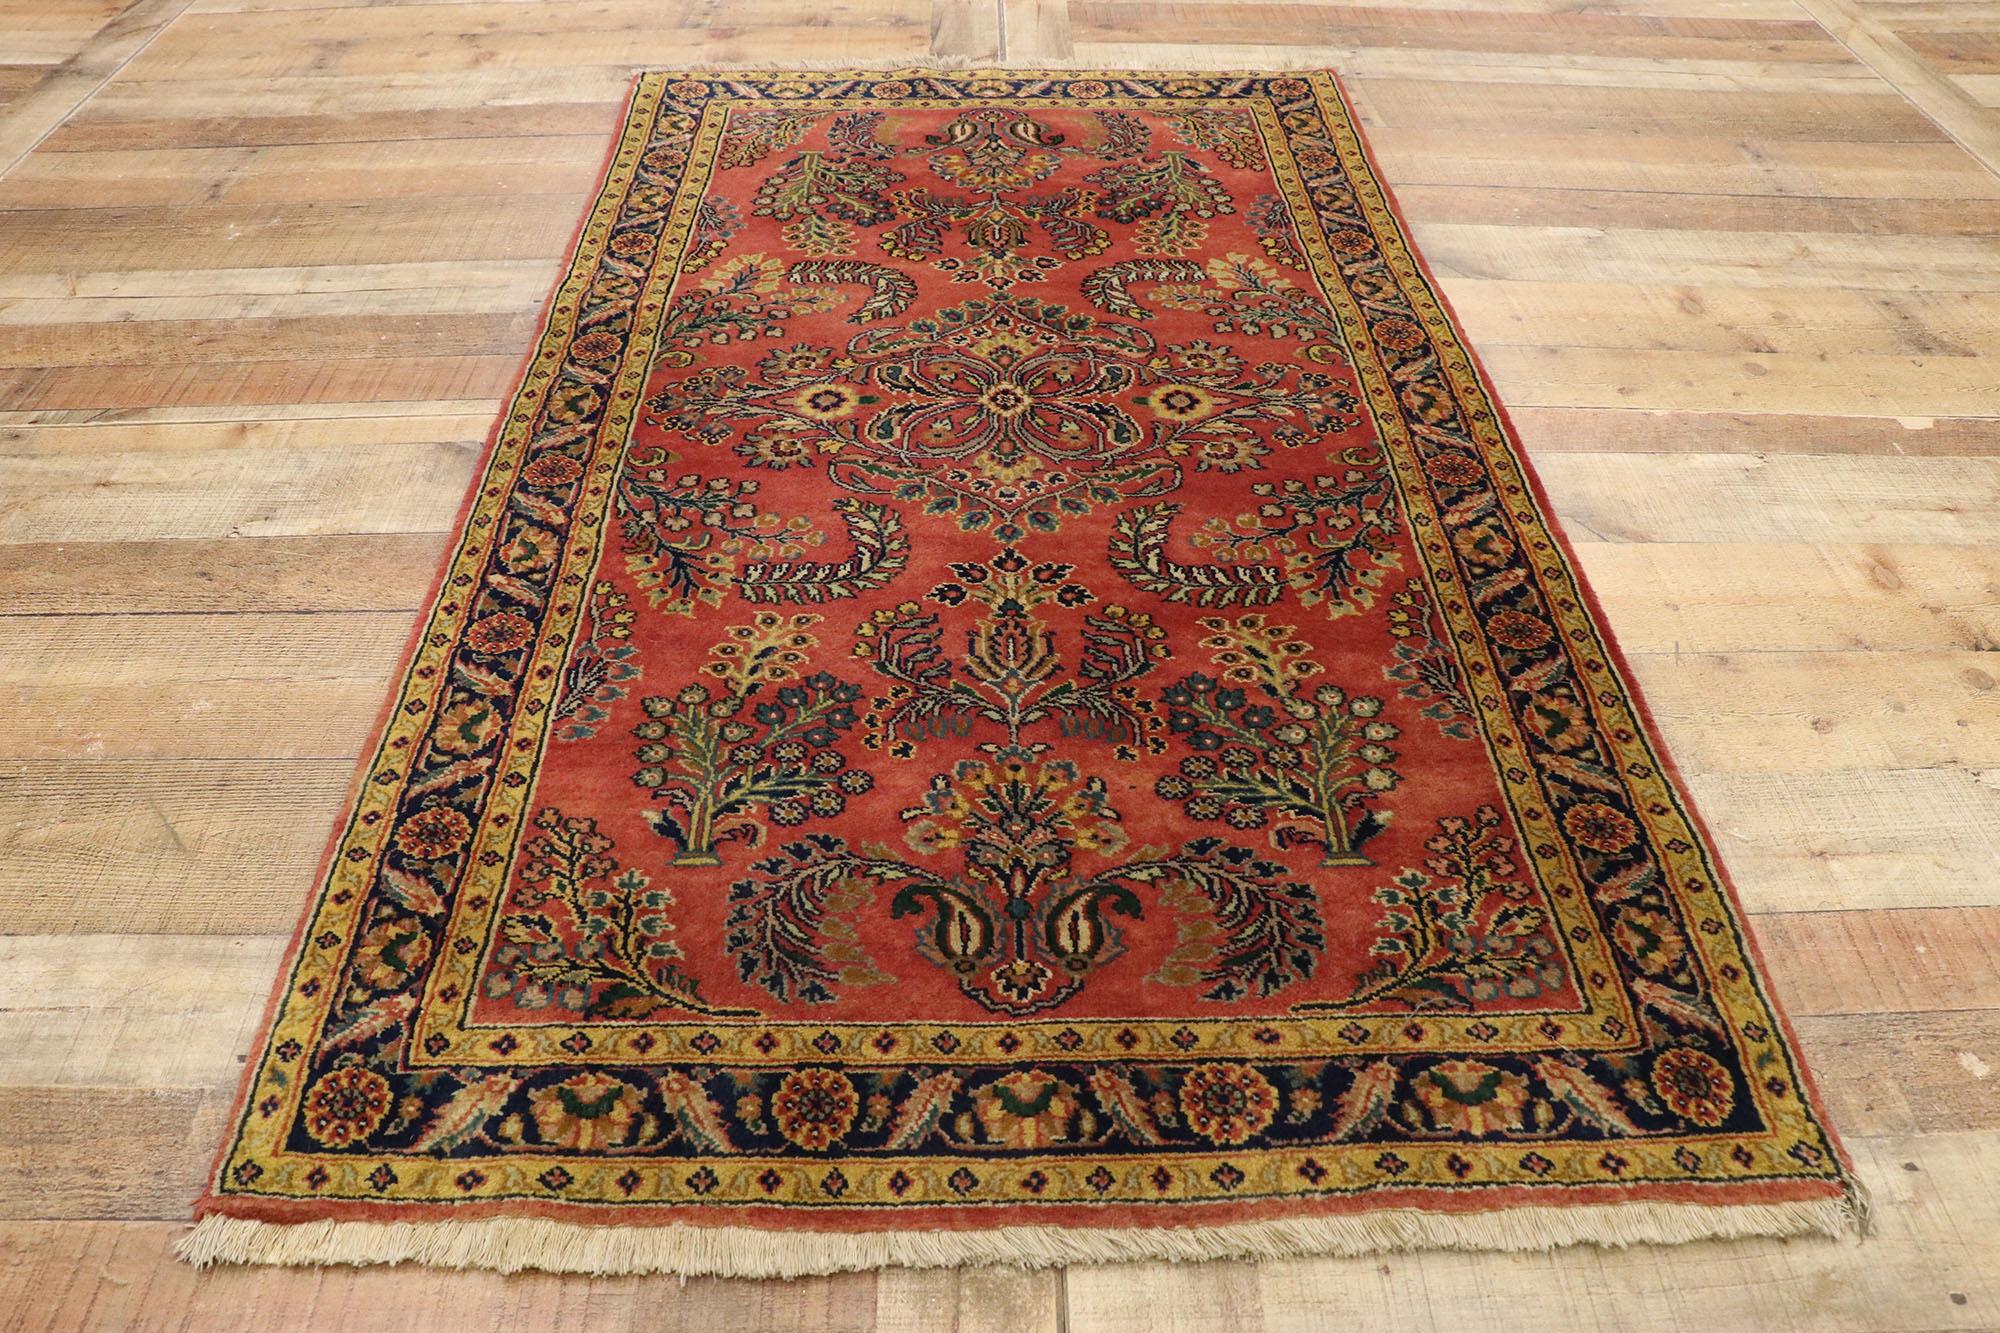 20th Century Vintage Persian Floral Sarouk Rug with Traditional English Tudor Style For Sale